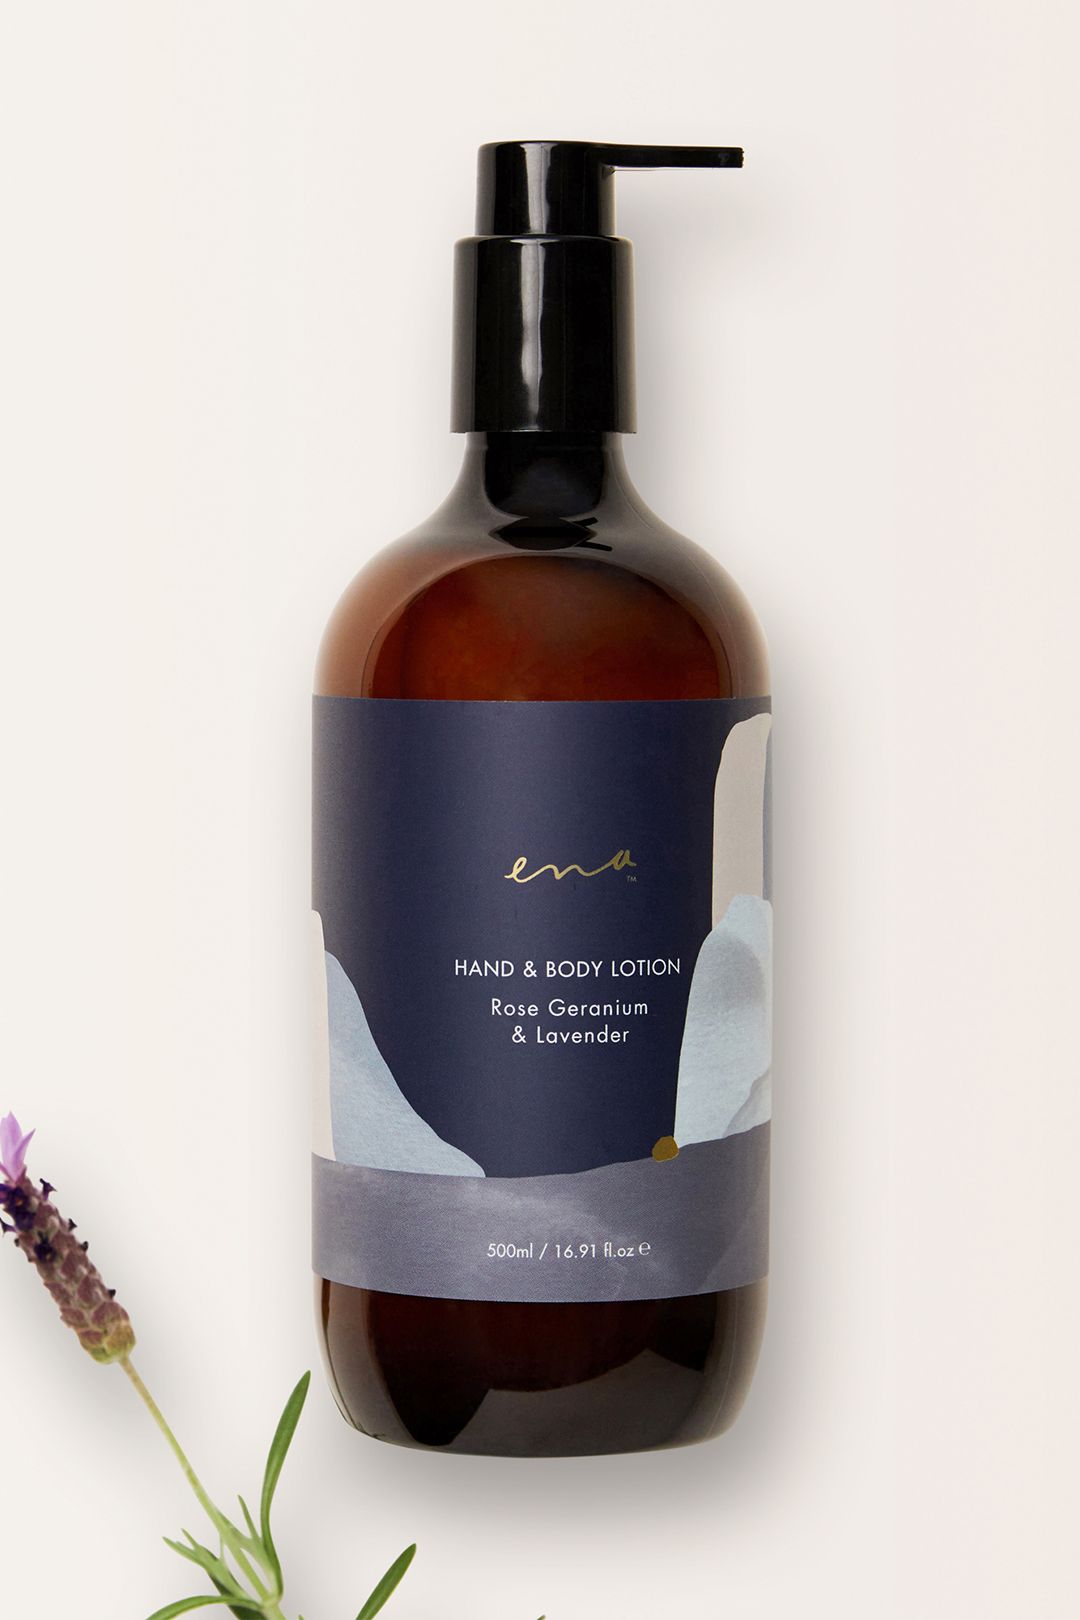 Ena-Hand-and-Body-Lotion-Rose-Geranium-and-Lavender-Product